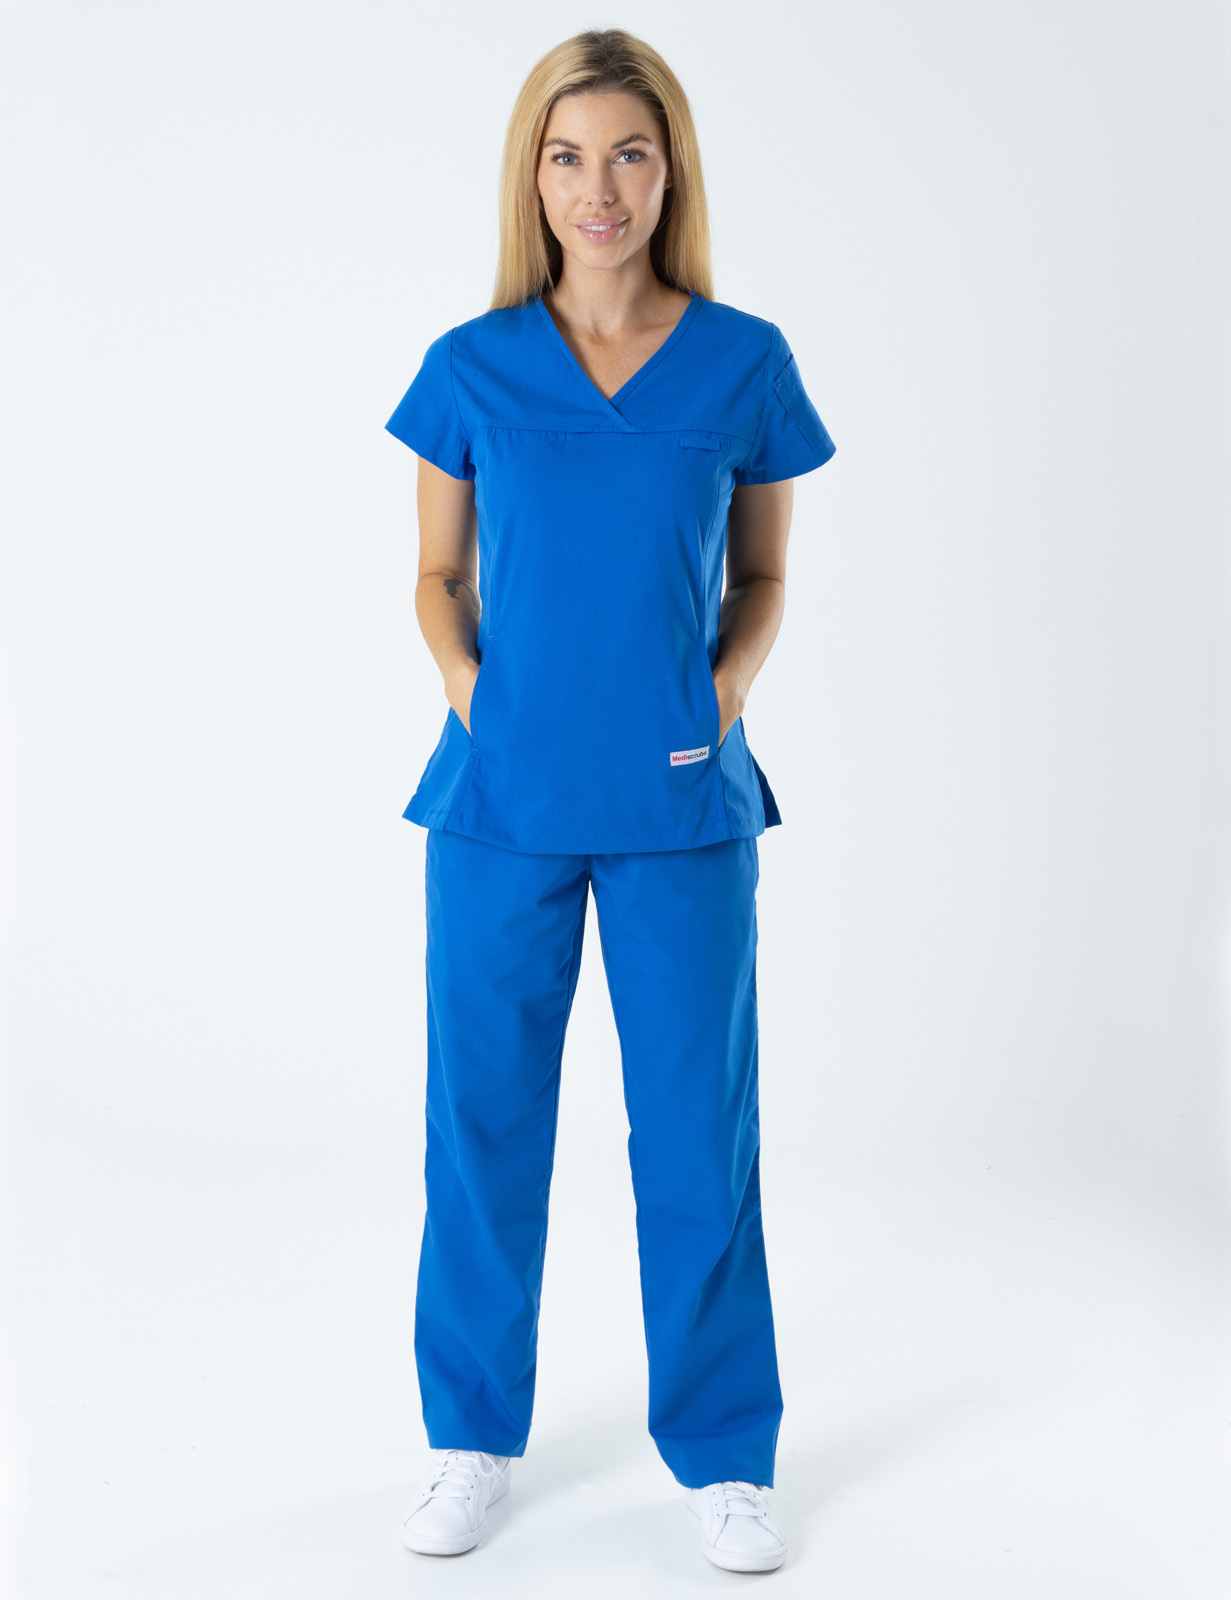 Innisfail Hospital - ED RN (Women's Fit Solid Scrub Top and Cargo Pants in Royal incl Logos)